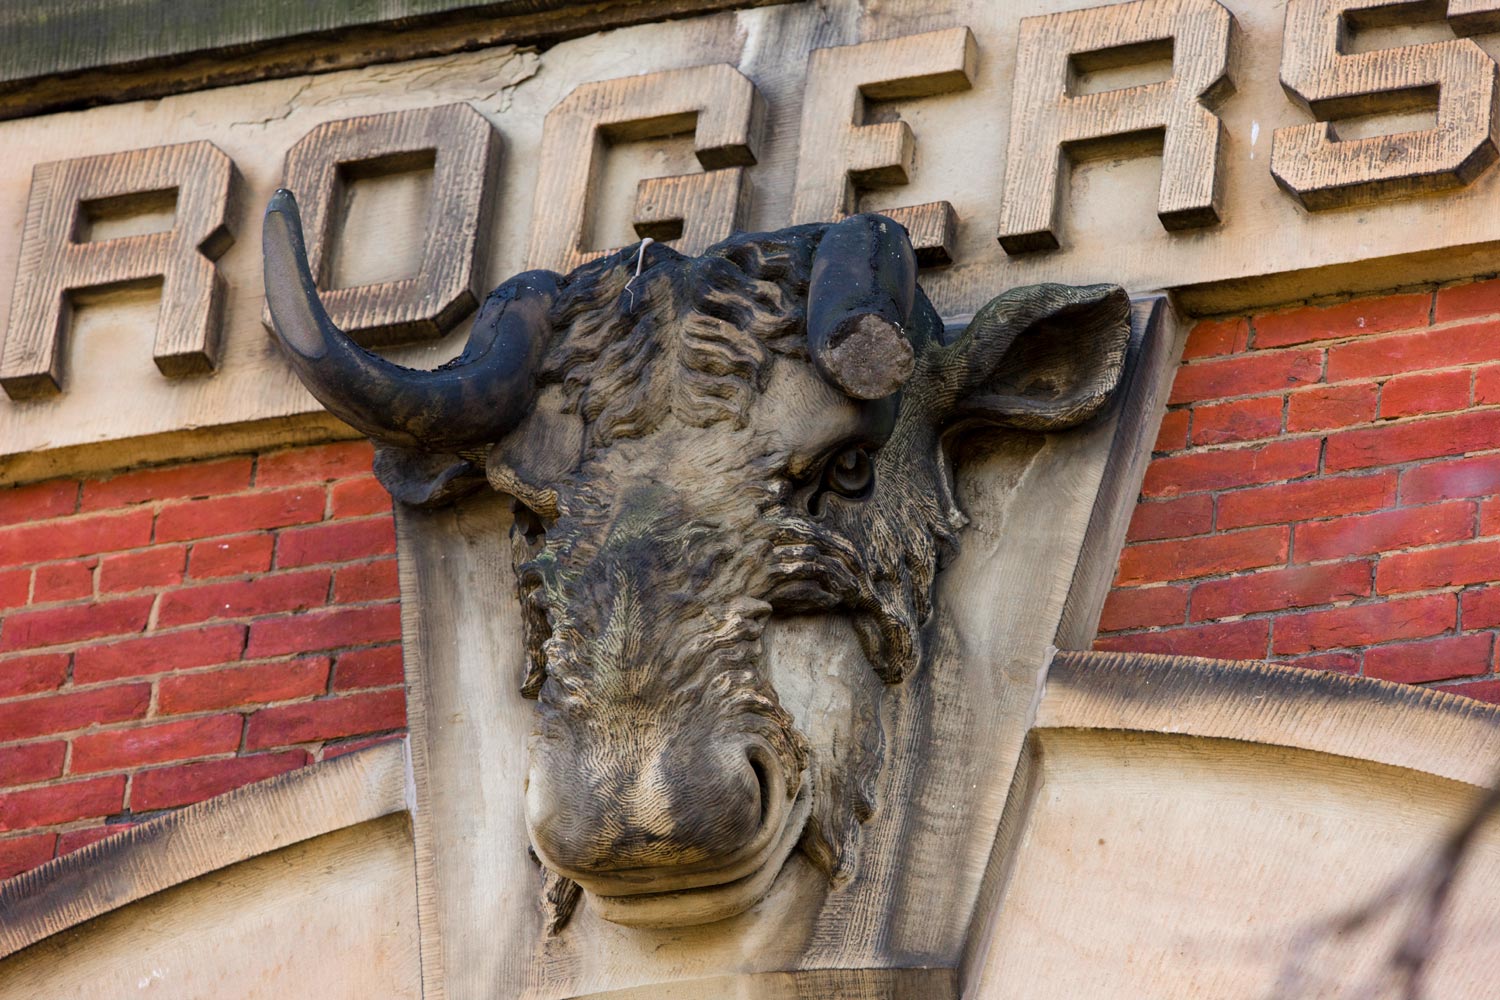 The carved bull on Brooks Hall's exterior